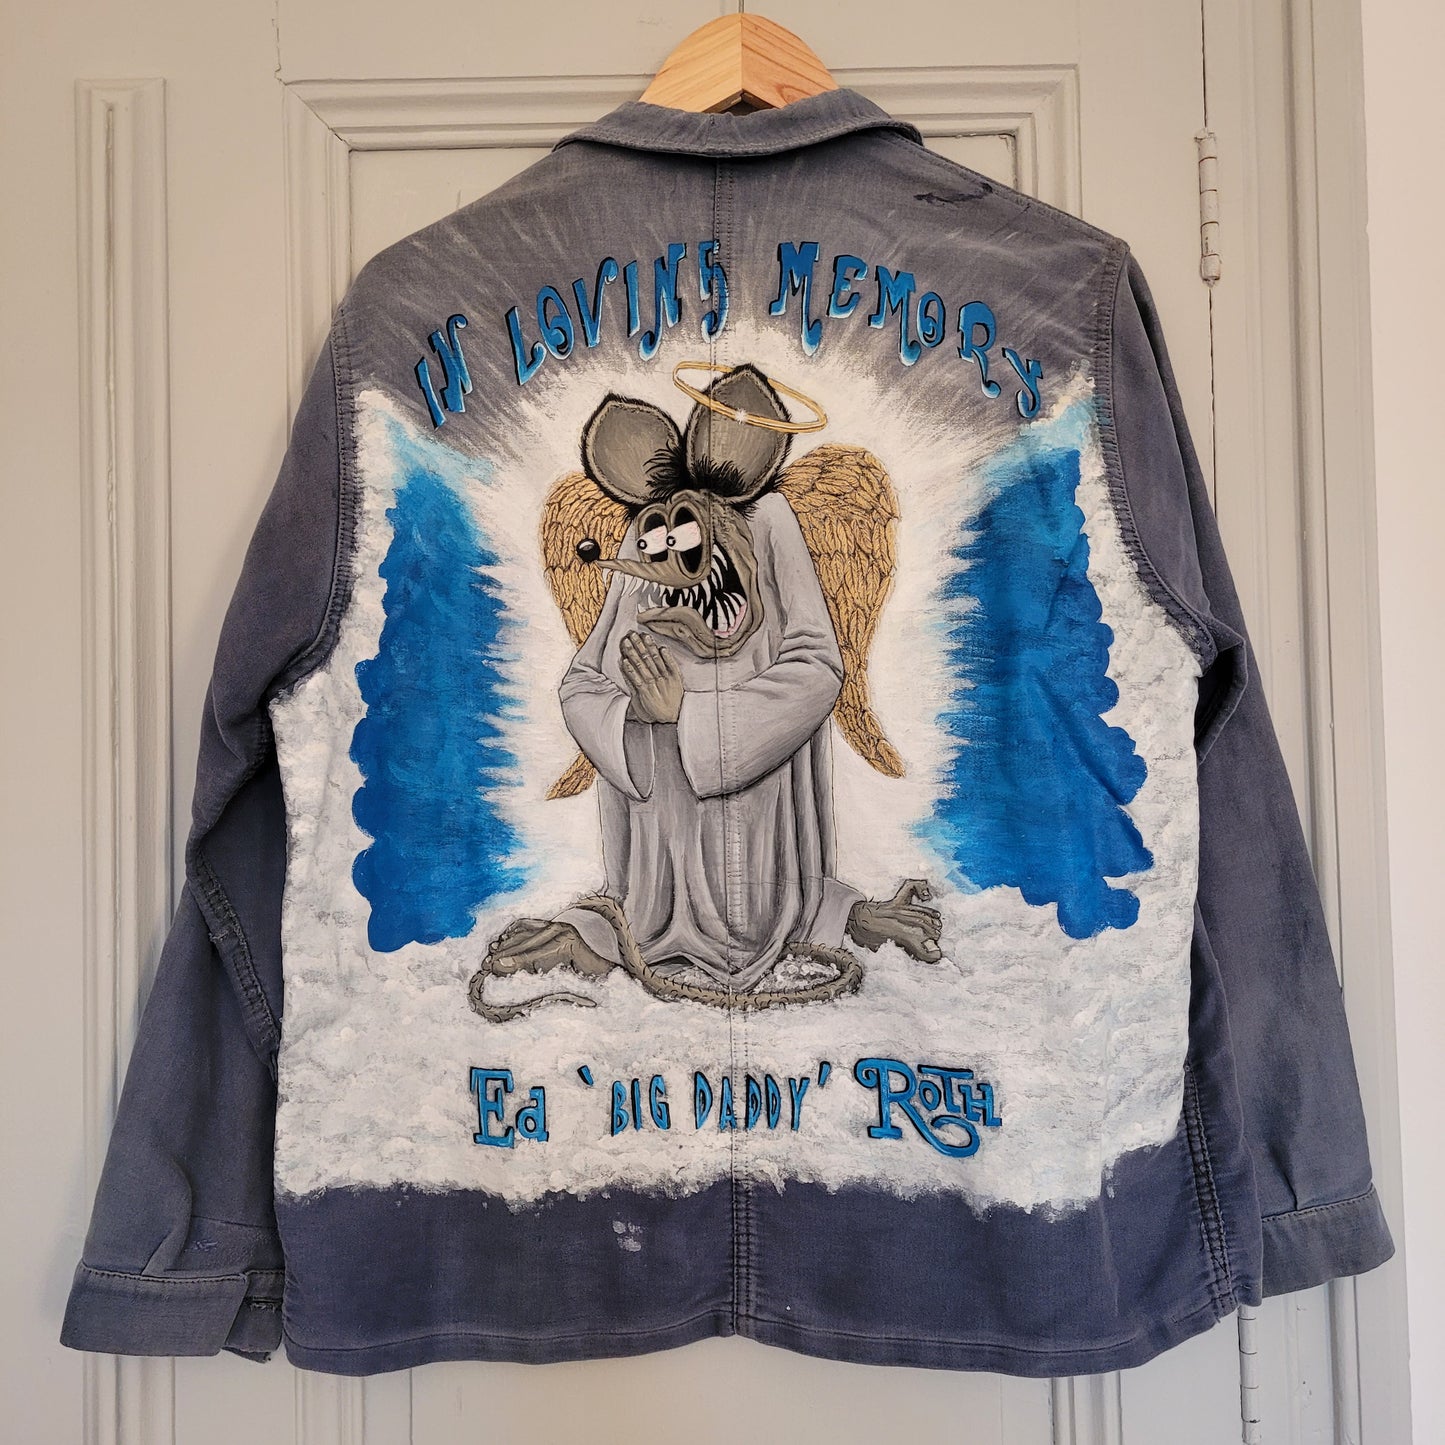 In loving memory of ED "Big Daddy" Roth handpainted french 50's moleskin jacket Rat Fink Angel